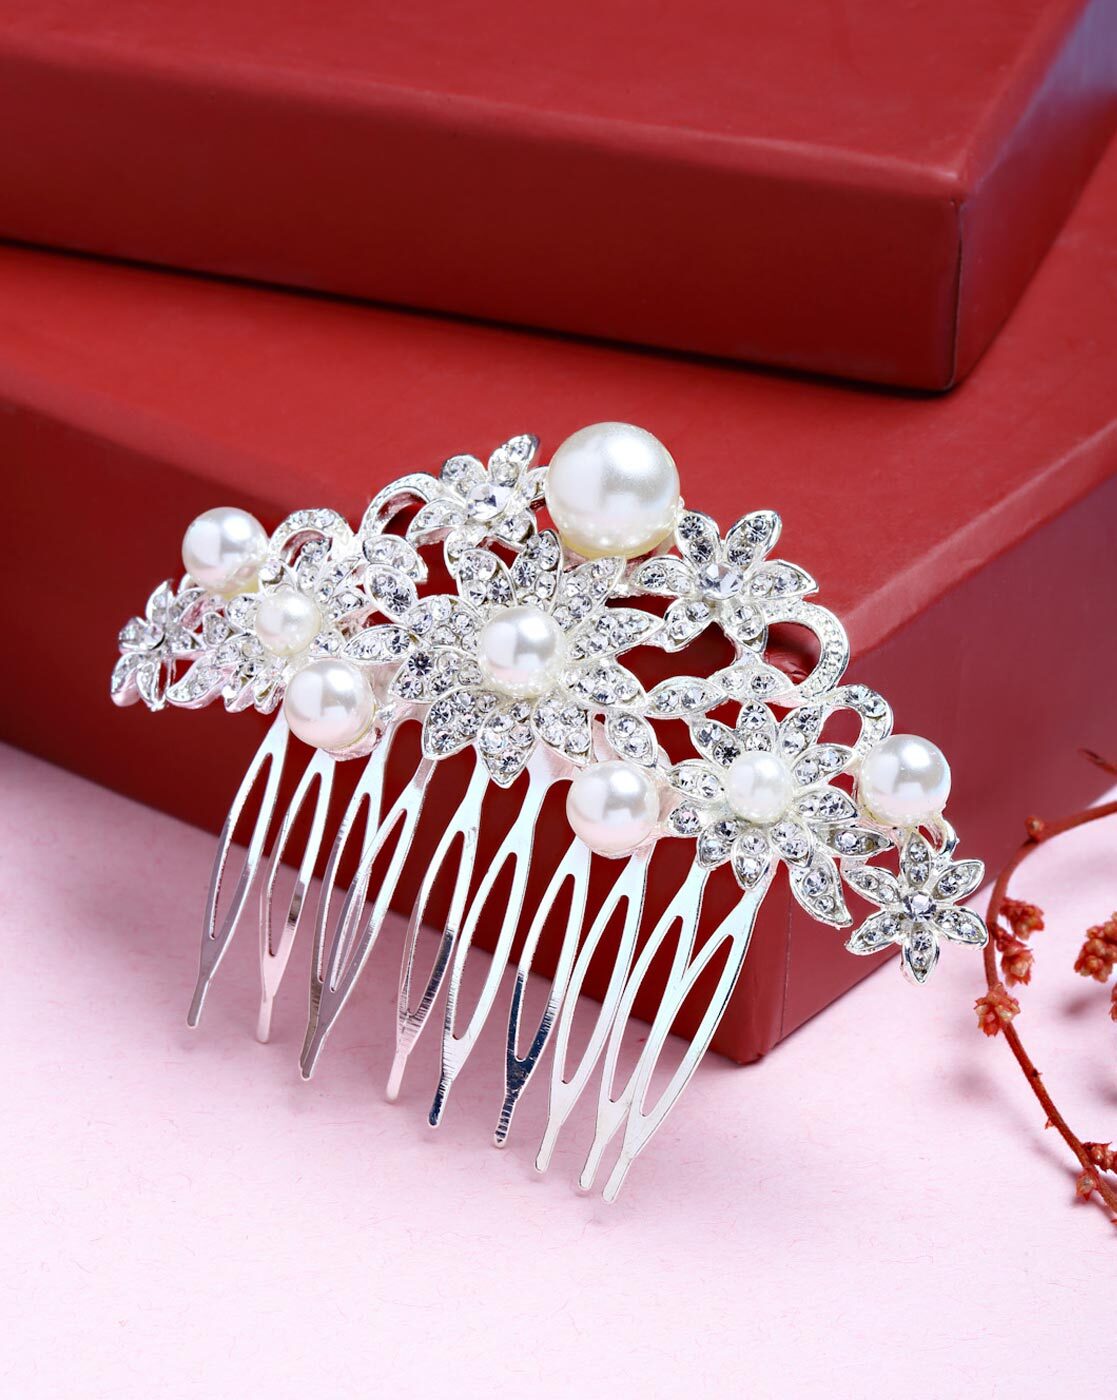 Hair Accessories - Buy Hair Accessories Online in India | Myntra